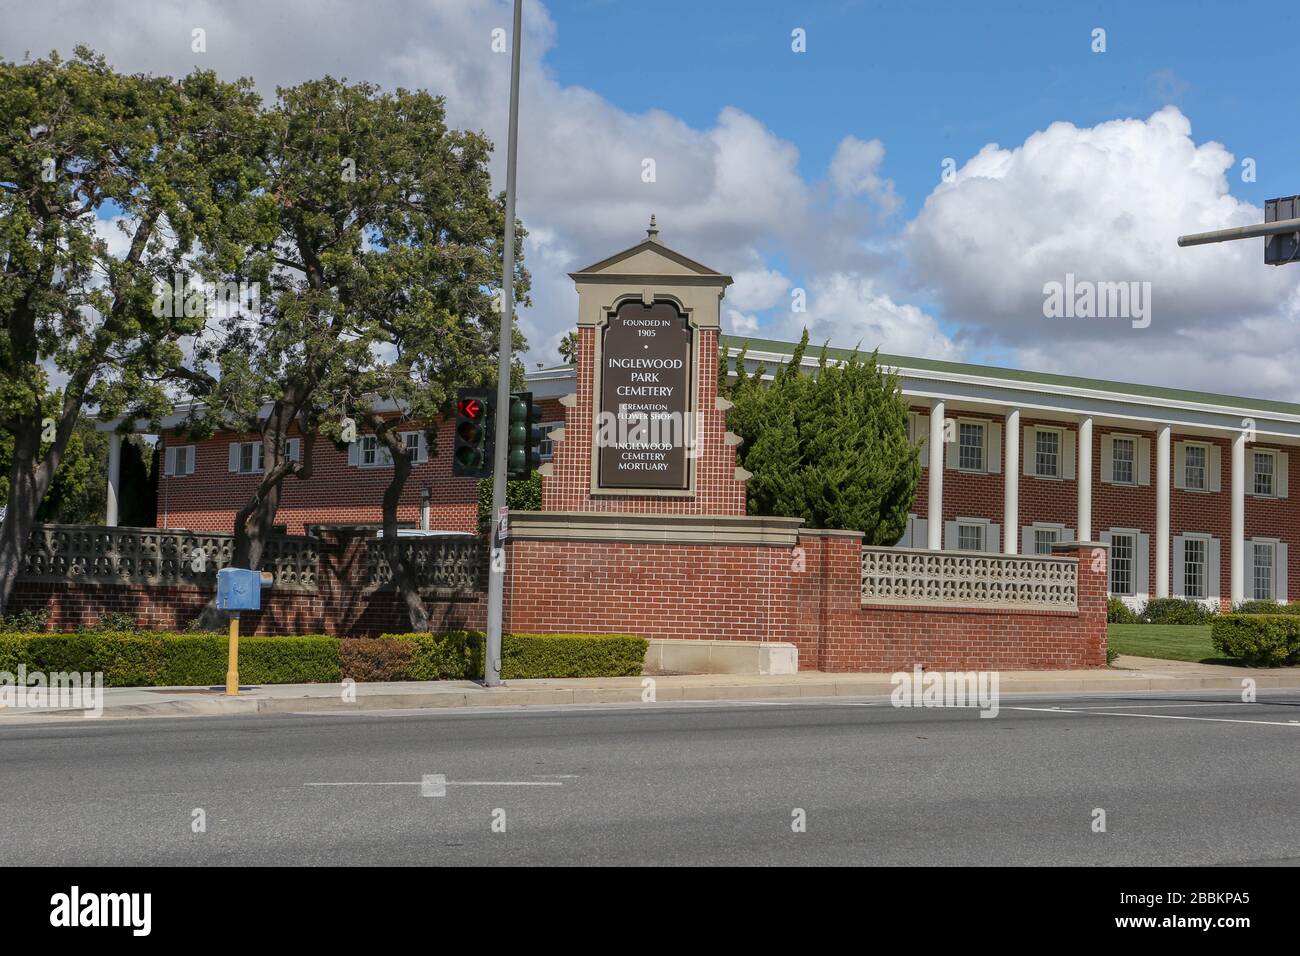 General view of Inglewood Cemetery Mortuary located at 3801 W Manchester Blvd, on Wednesday, March 25, 2020 in Inglewood, California, USA. (Photo by IOS/Espa-Images) Stock Photo